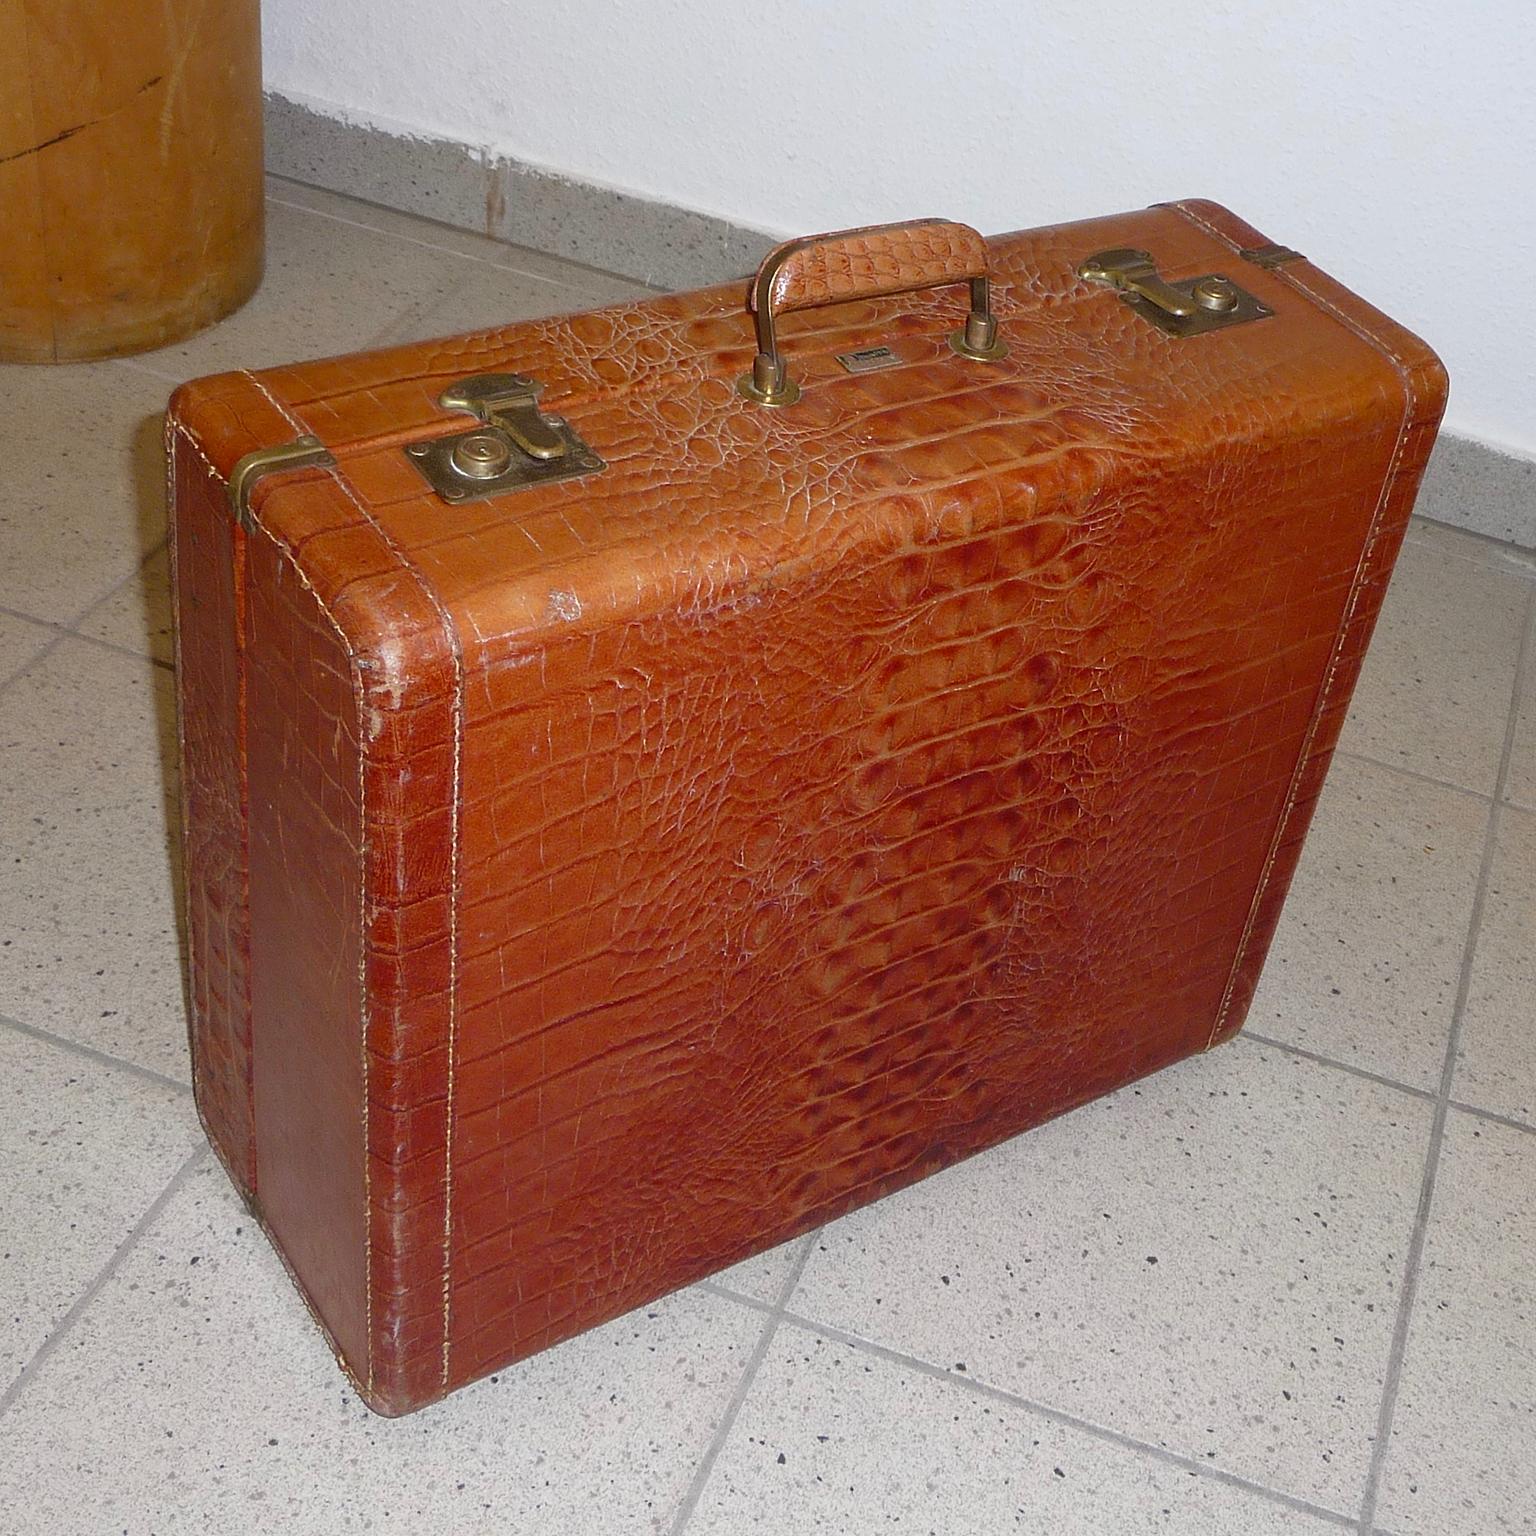 A Dionite vintage leather luggage, alligator look, extremely decorative.
Light body covered with alligator patterned cow leather. Under the handle a brass plate with company logo.
All straps and clasps are in working order. Very clean interior.